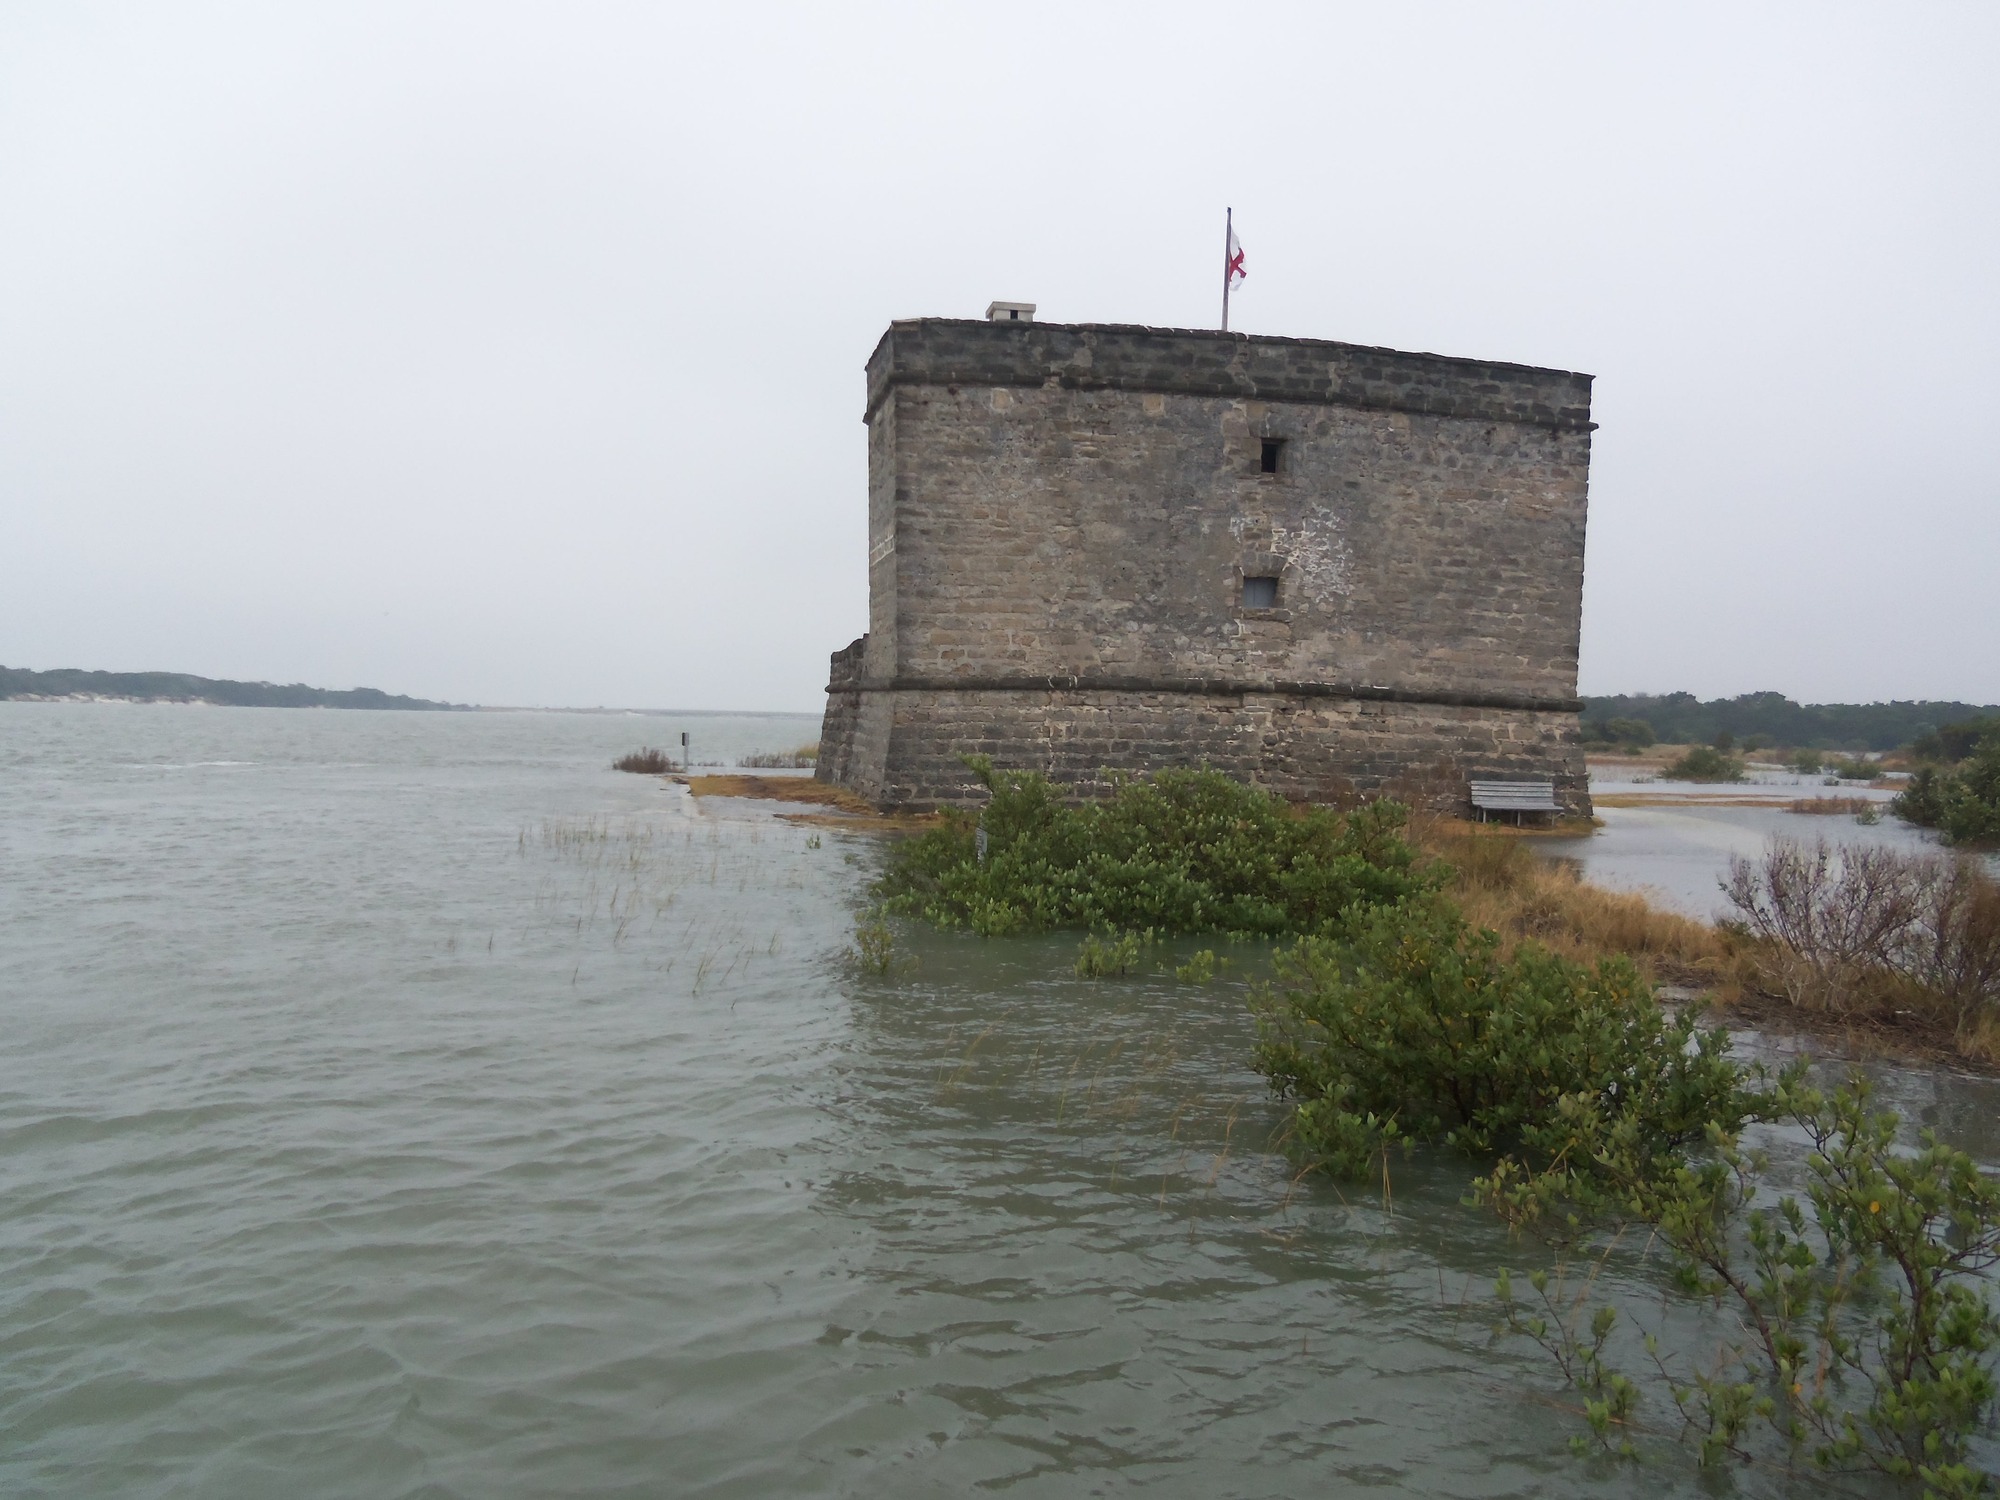 Survey of the high tide at Fort Matanzas and surrounding areas. Tides cover most walking surfaces